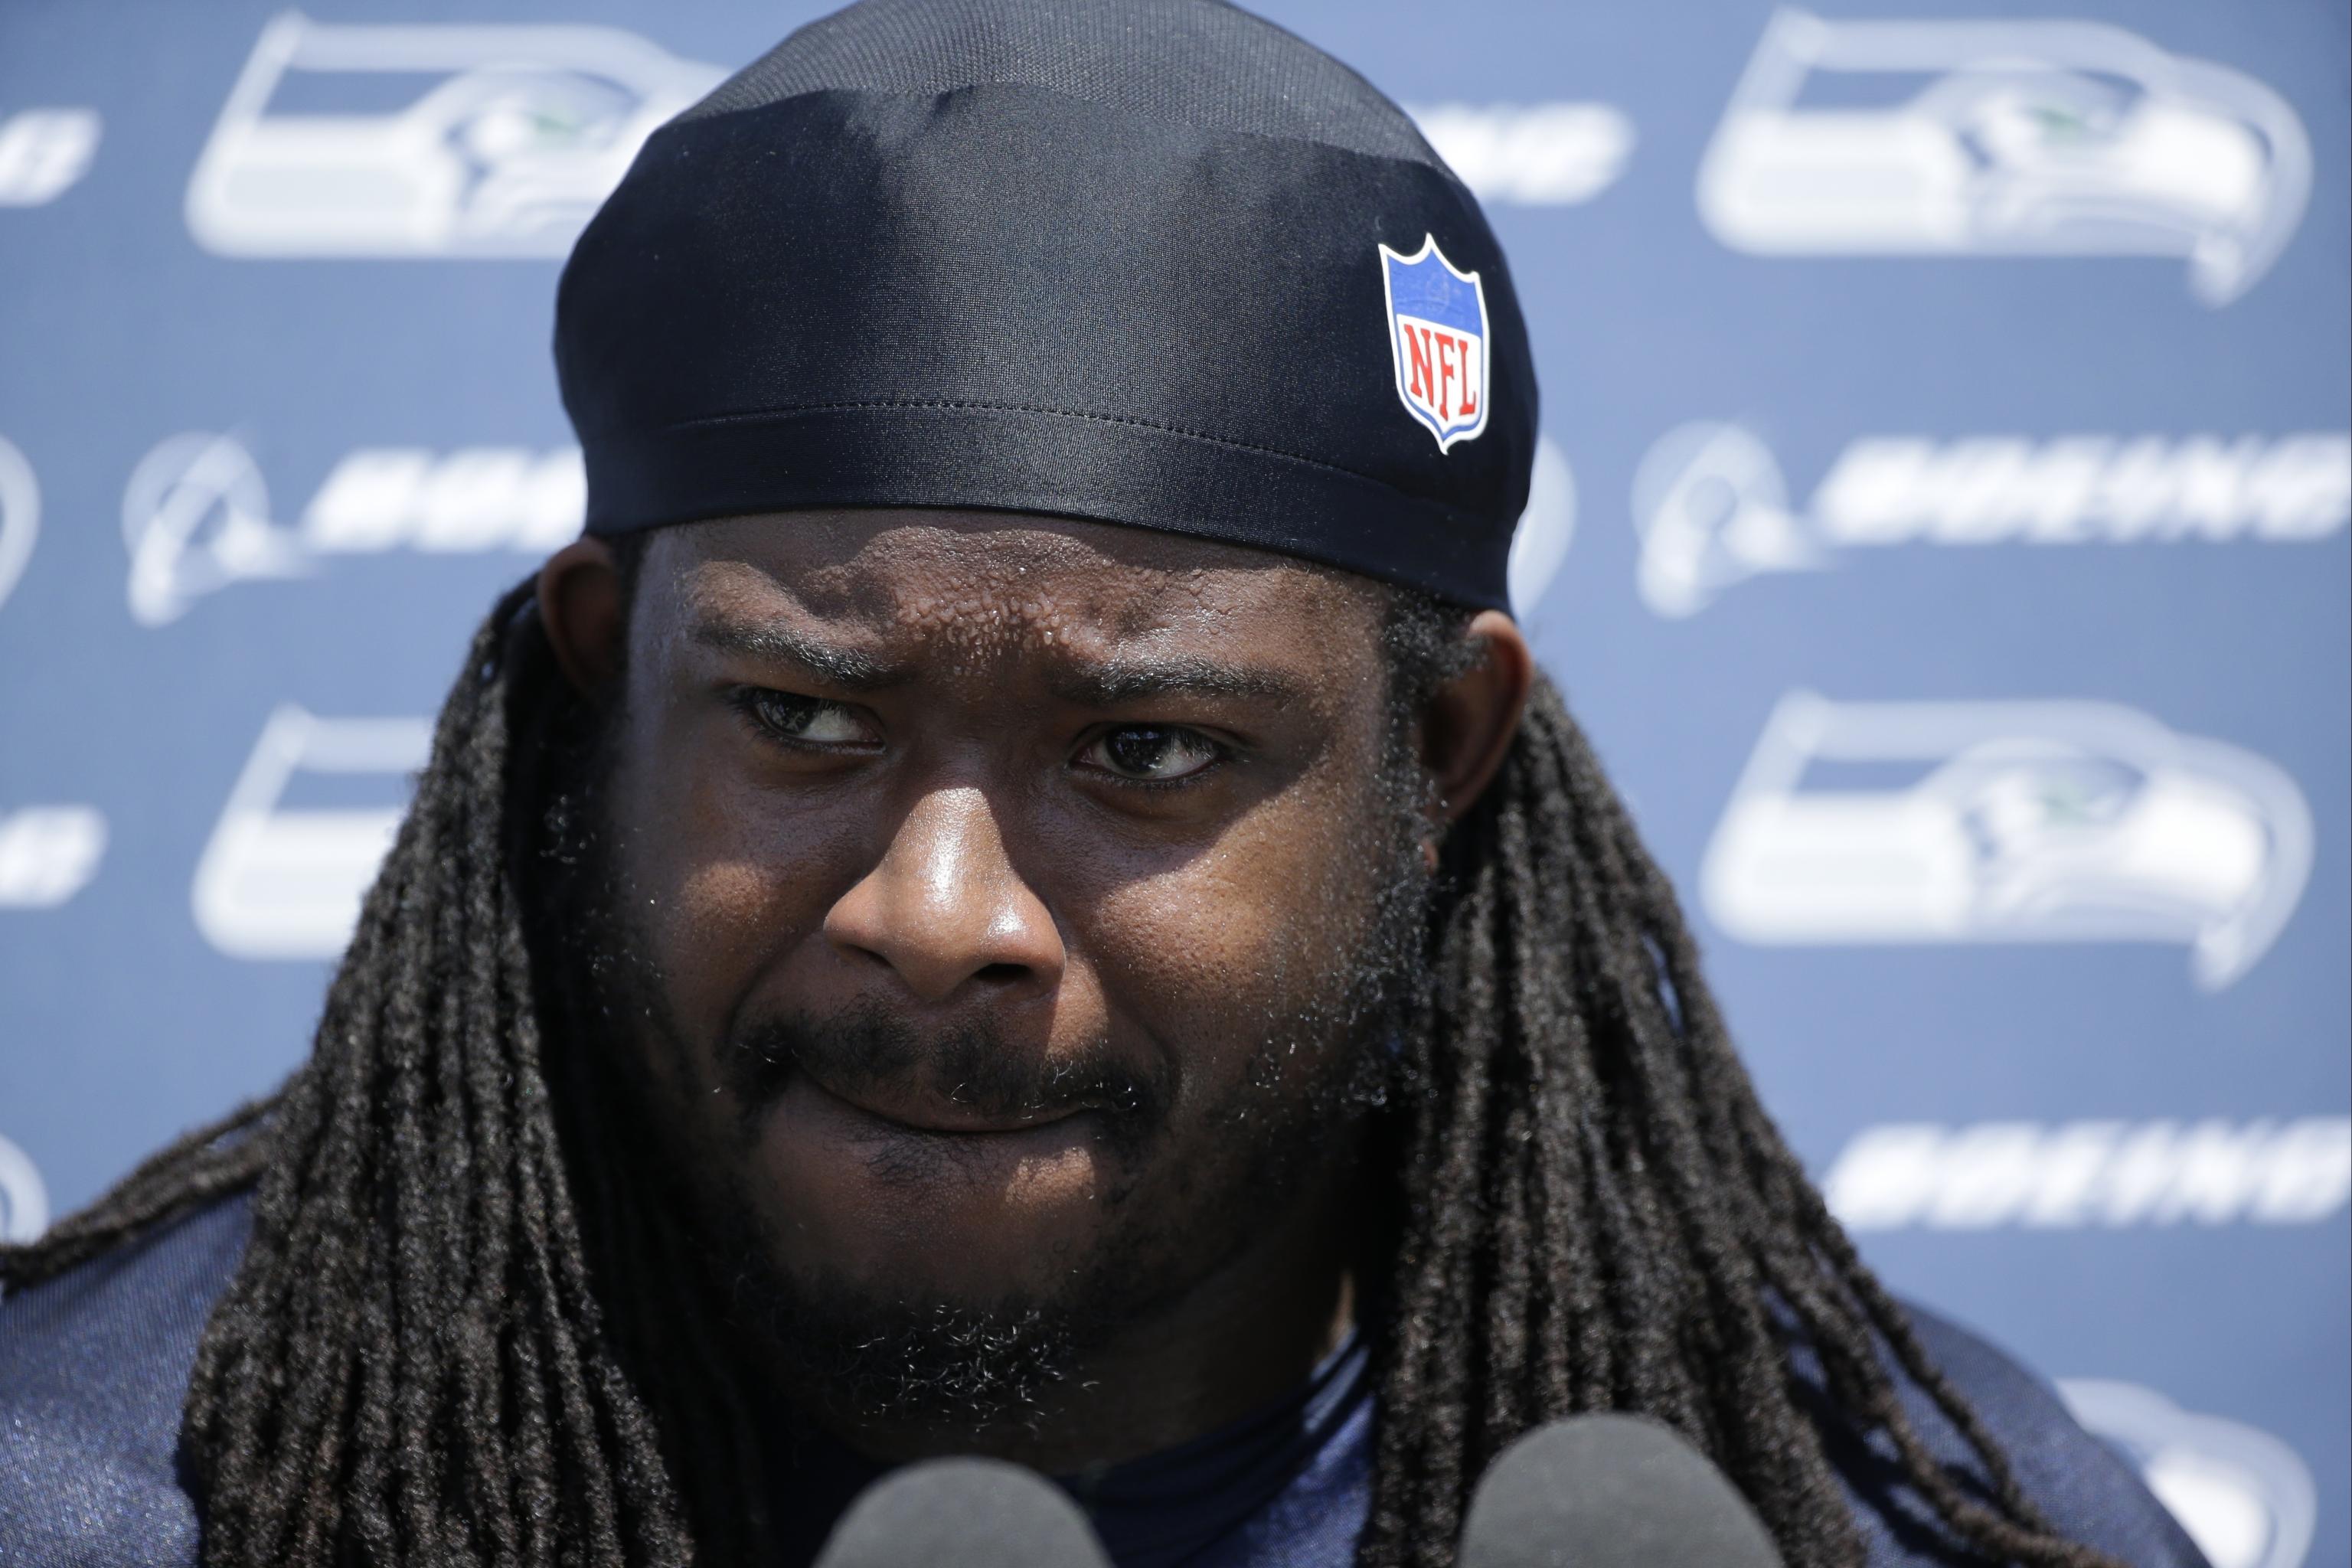 Eddie Lacy weighs in at 253 pounds, collects $55,000 - Sports